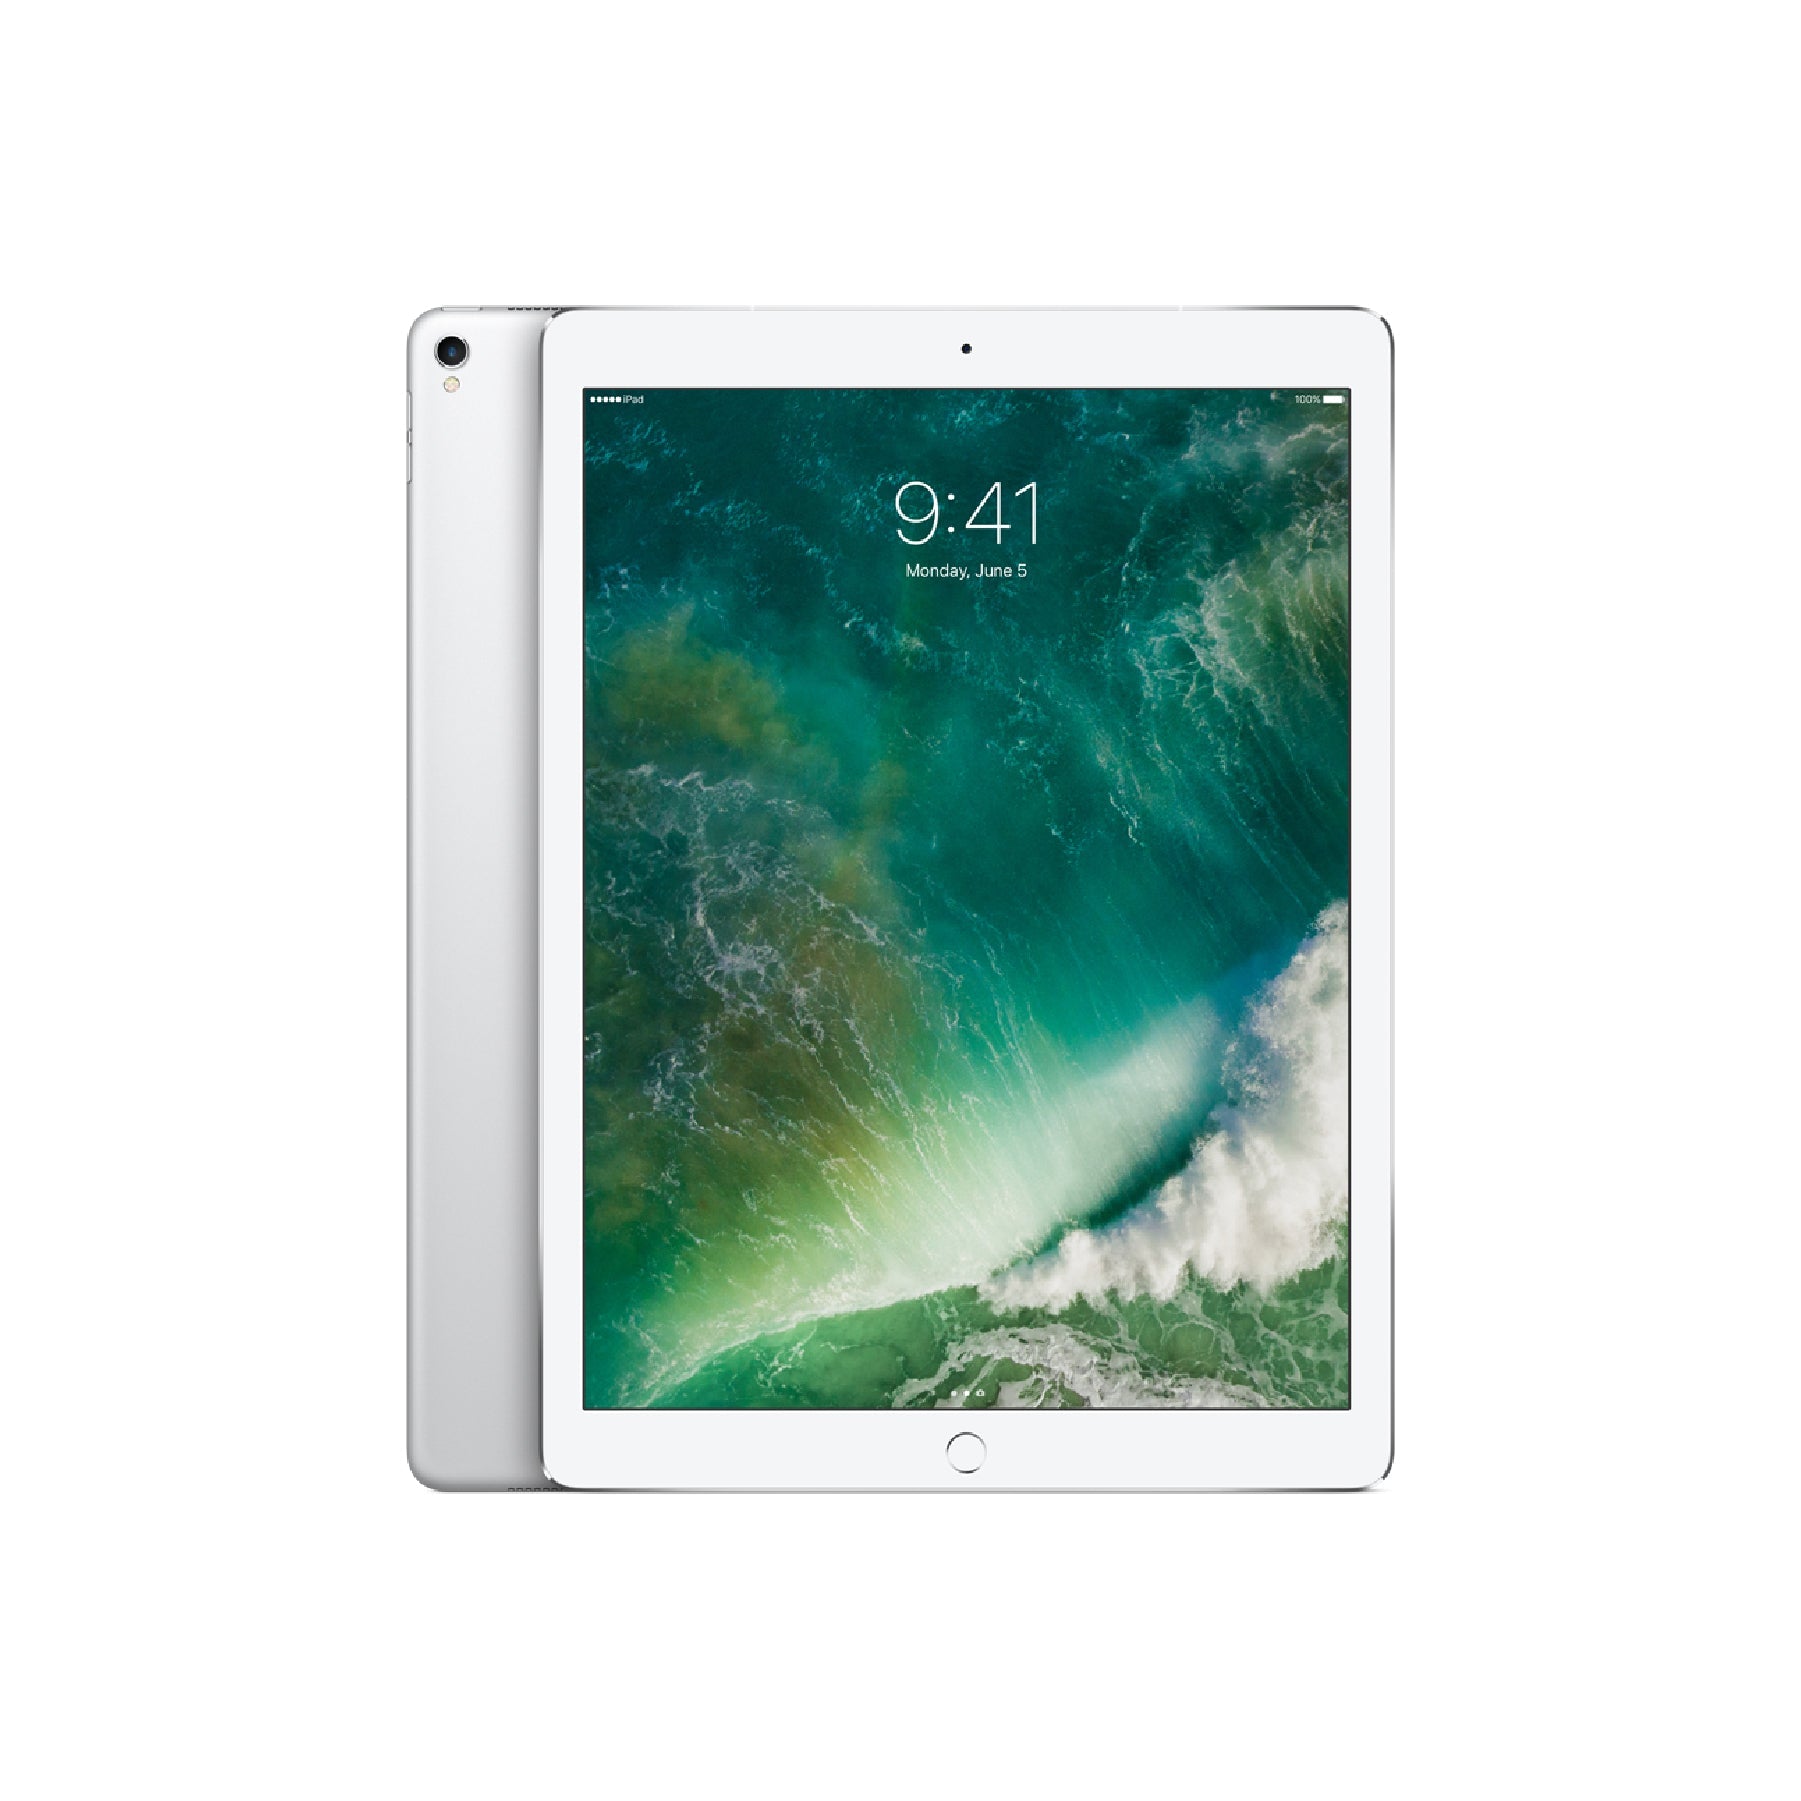 iPad Pro (10.5-inch, 2017) Wi-Fi - iStore Pre-owned